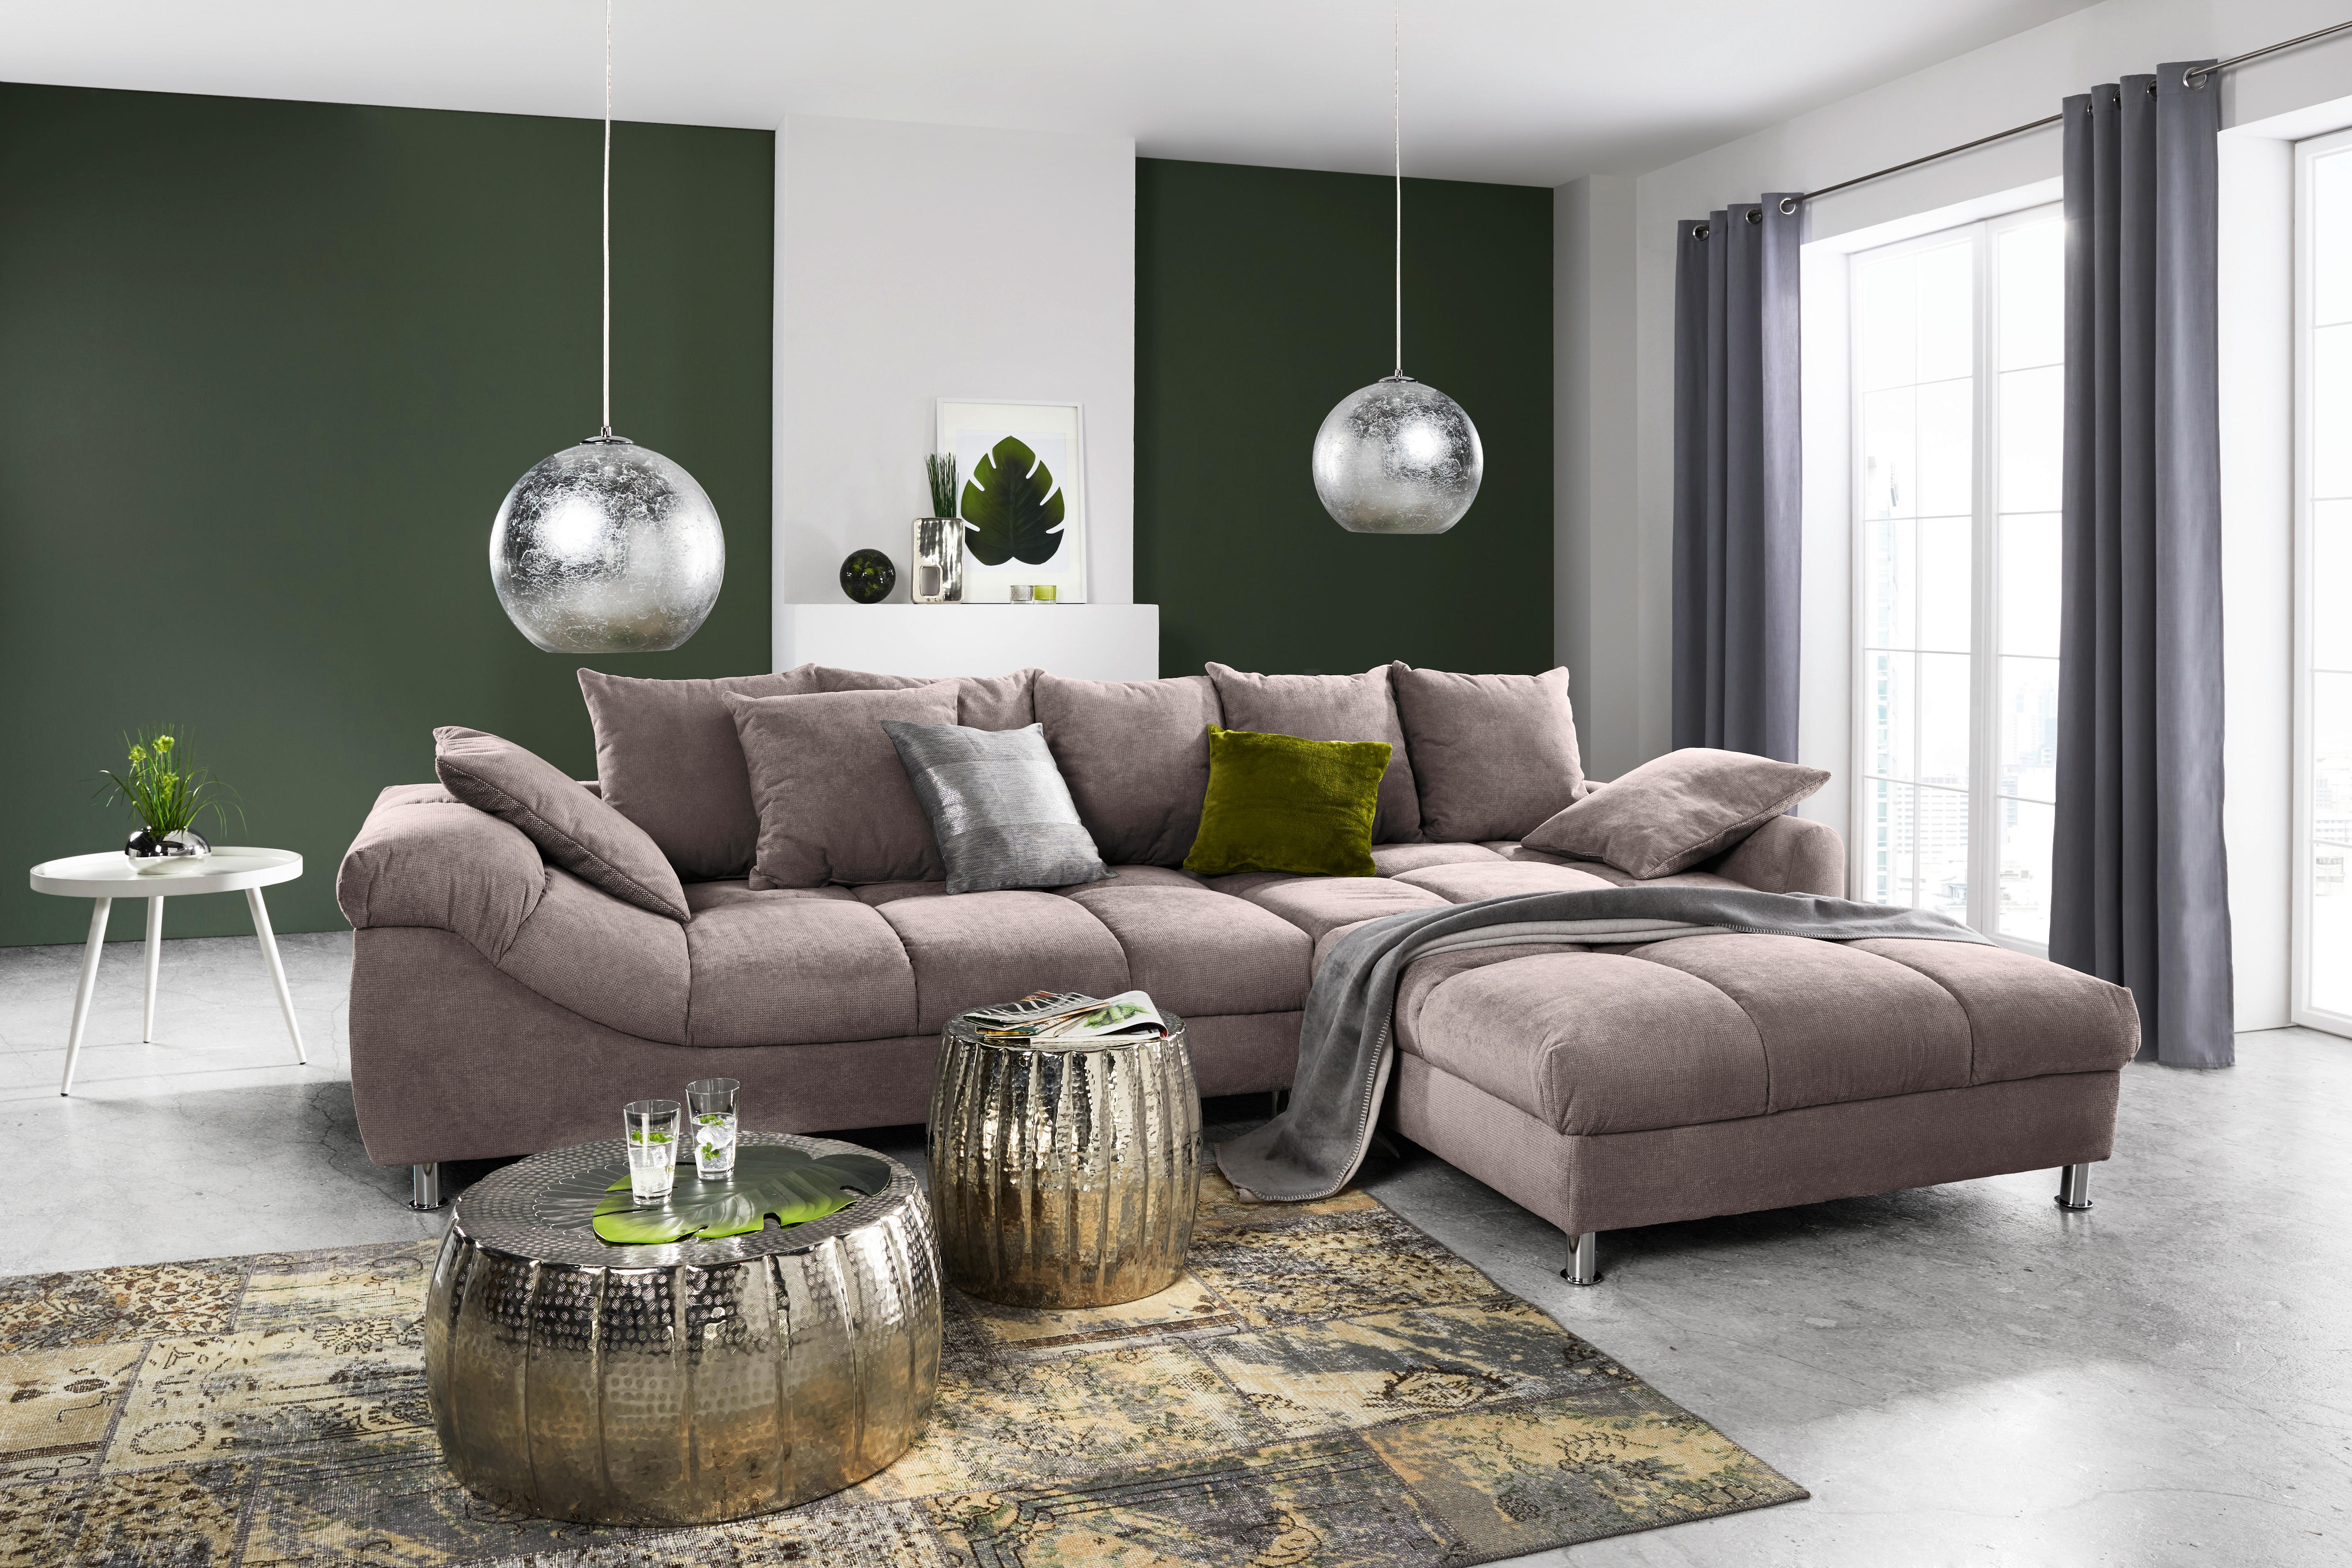 ECKSOFA in Webstoff Taupe  - Taupe, Design, Textil/Metall (337/228cm) - Carryhome